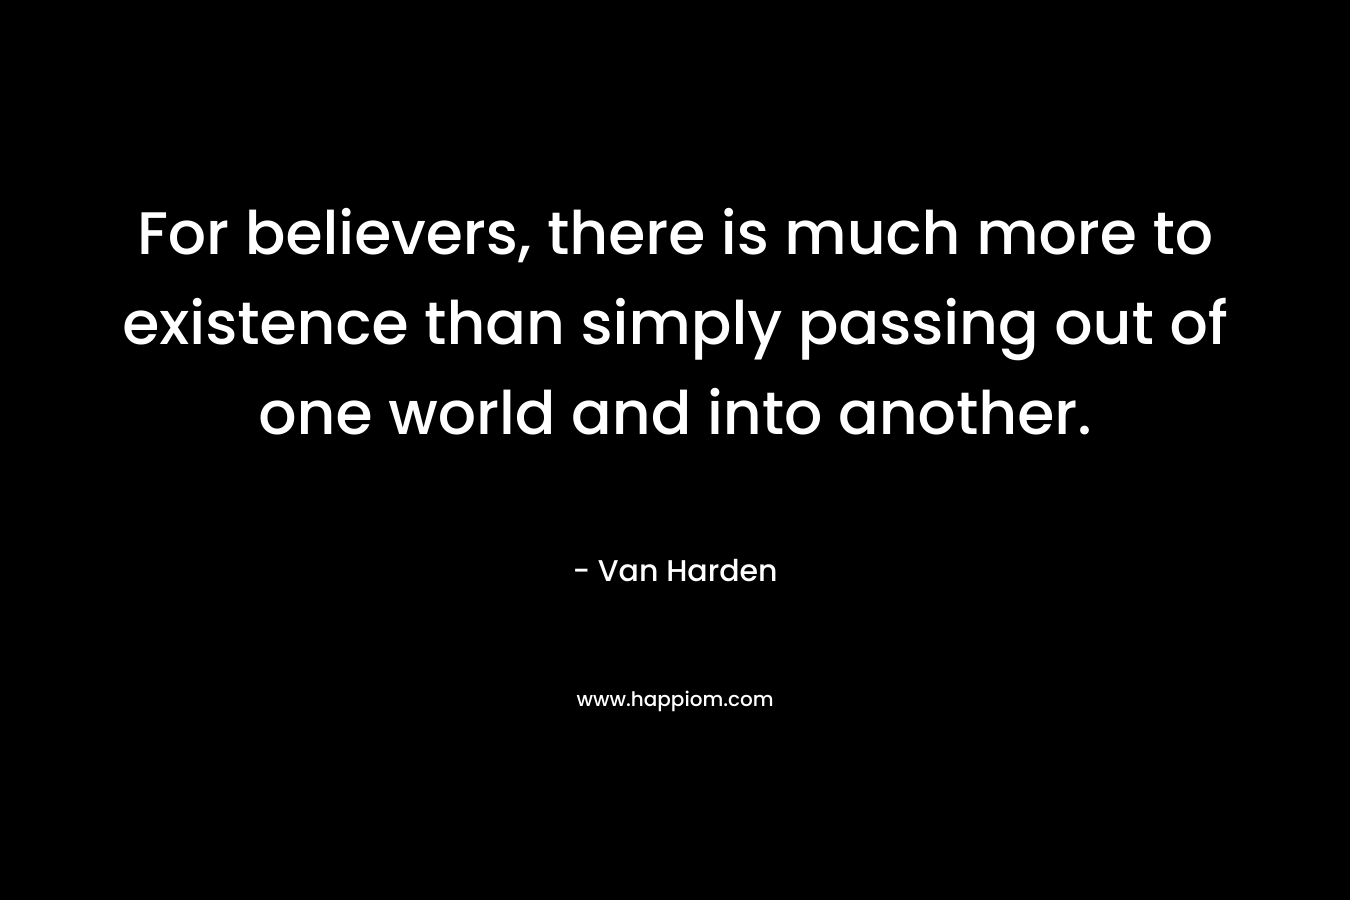 For believers, there is much more to existence than simply passing out of one world and into another.